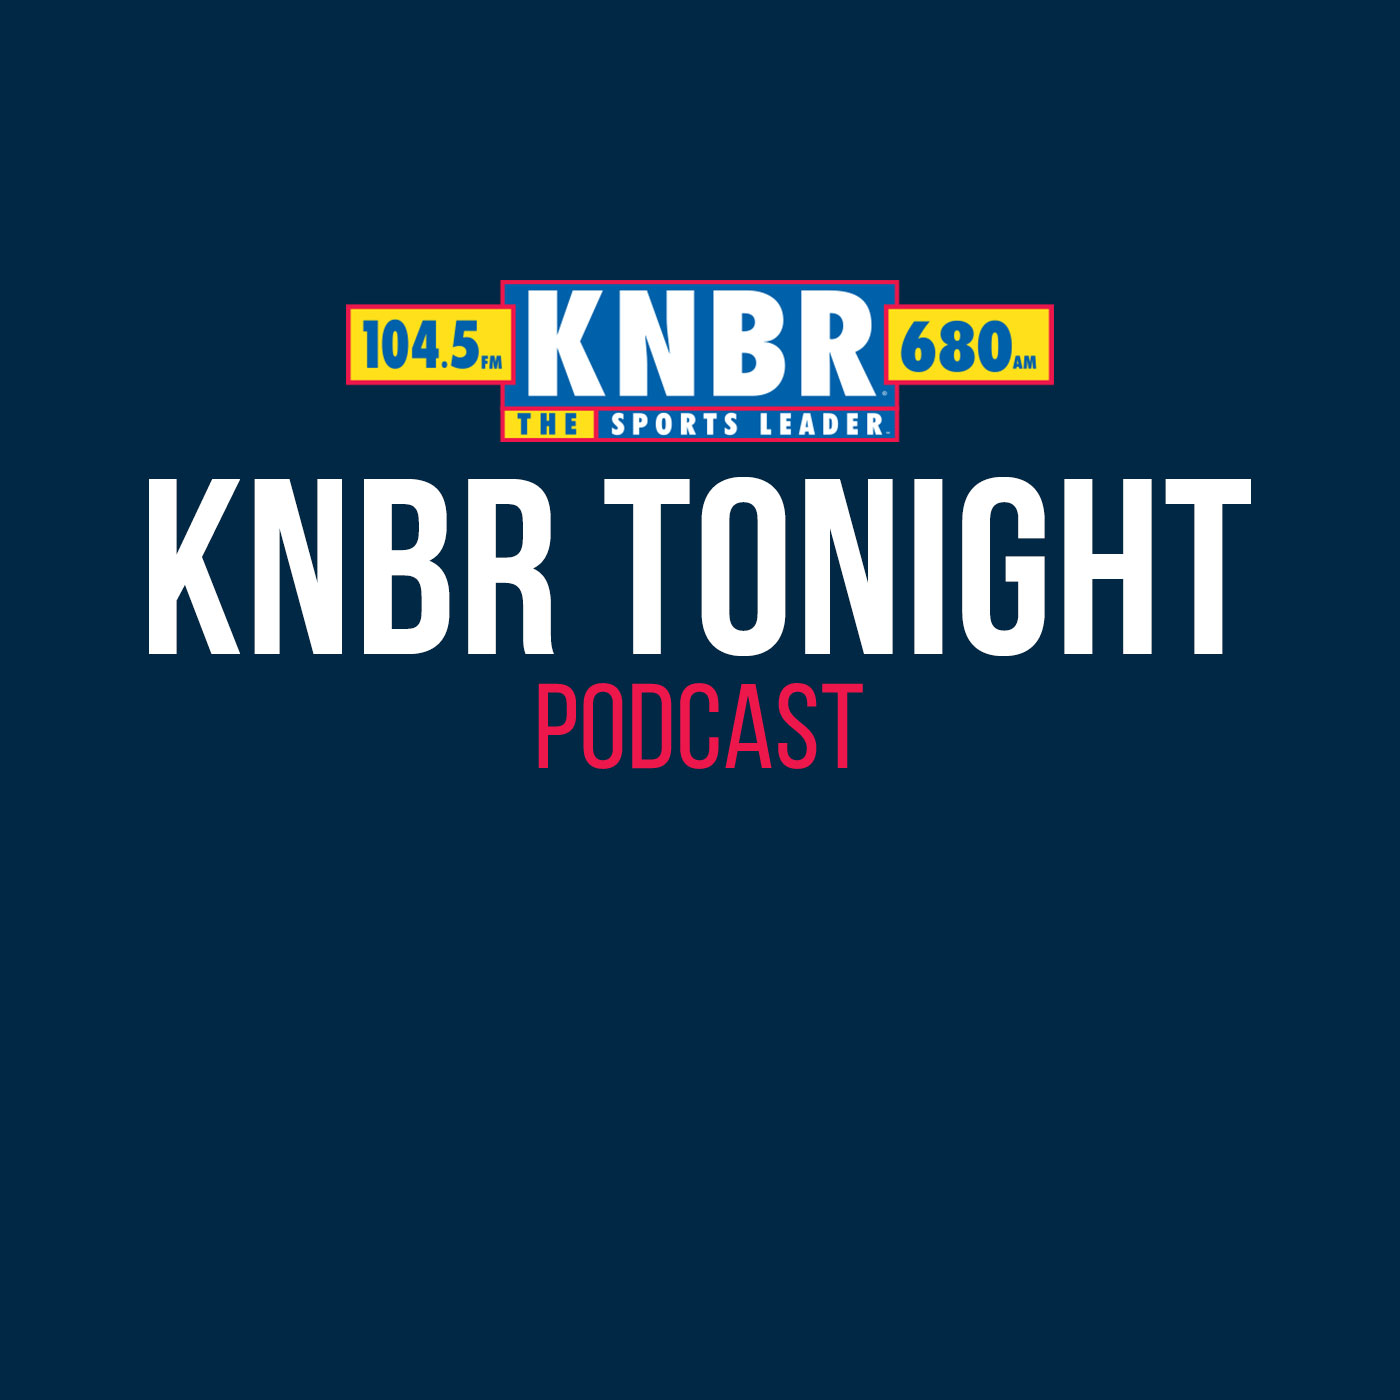 2-11 Grant Liffman joins KNBR Tonight with Dieter to break down why the Warriors can't rebound without Draymond